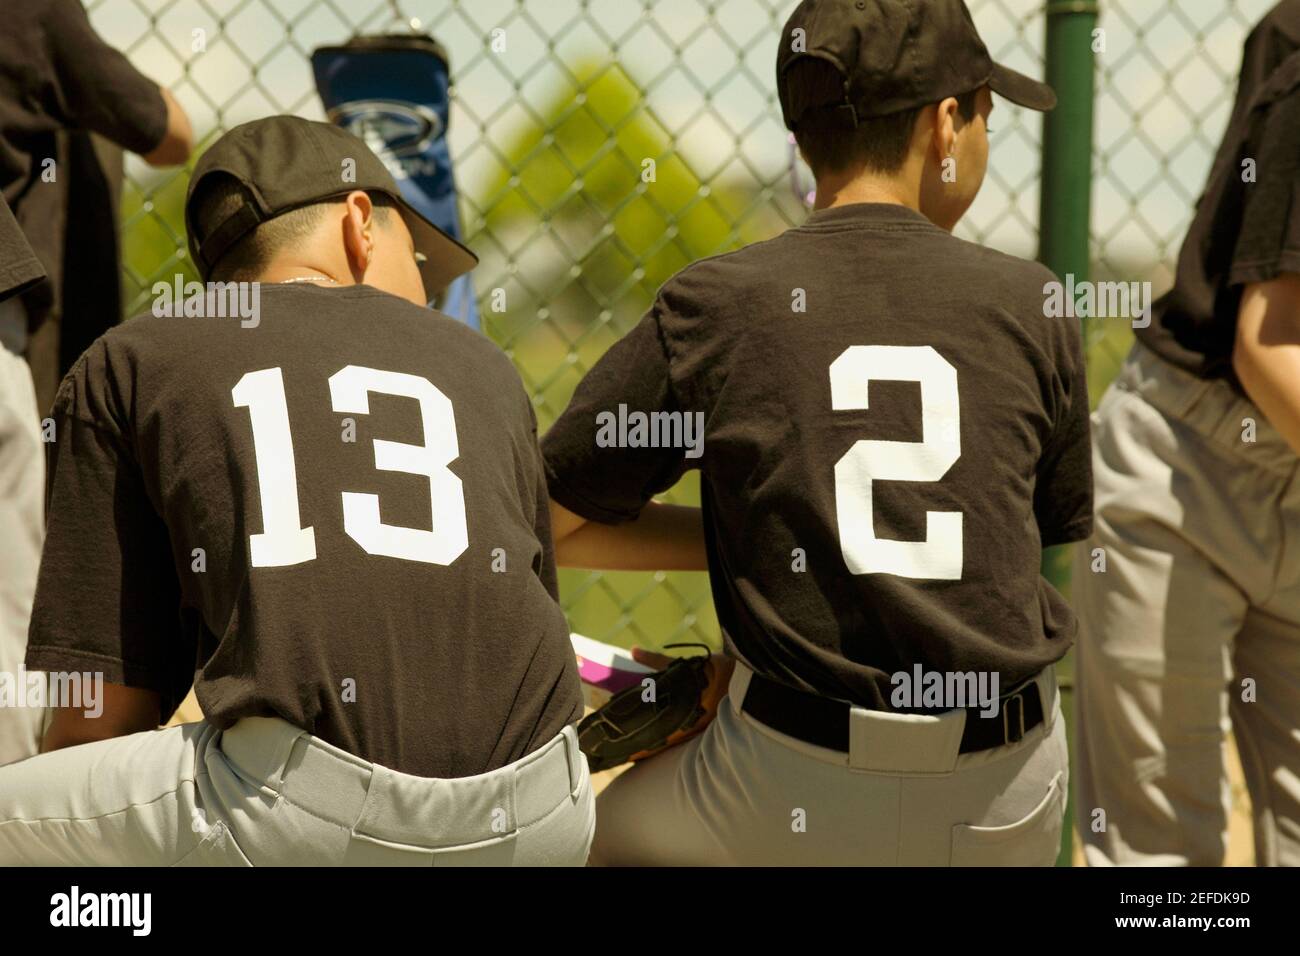 Rear view of two baseball players sitting on a bench Stock Photo